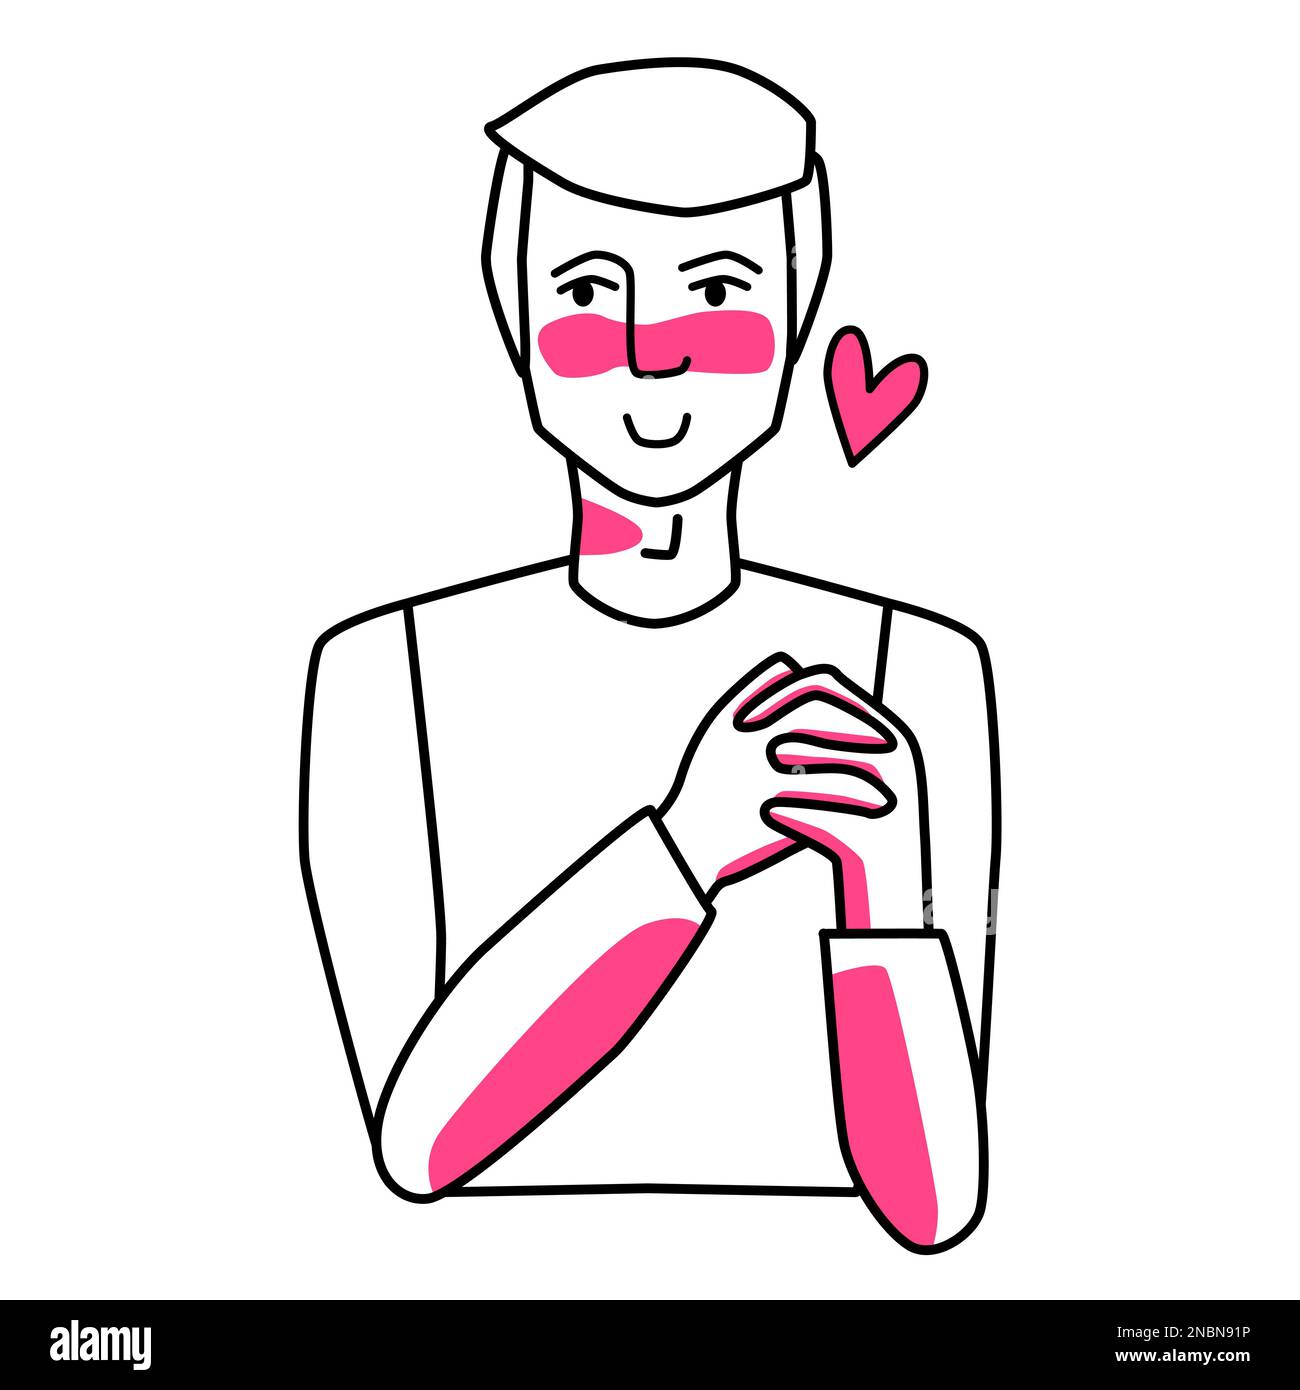 Adult male in love, holding his hands. Line art, hand drawn sketch style illustration with pink spots. Stock Vector